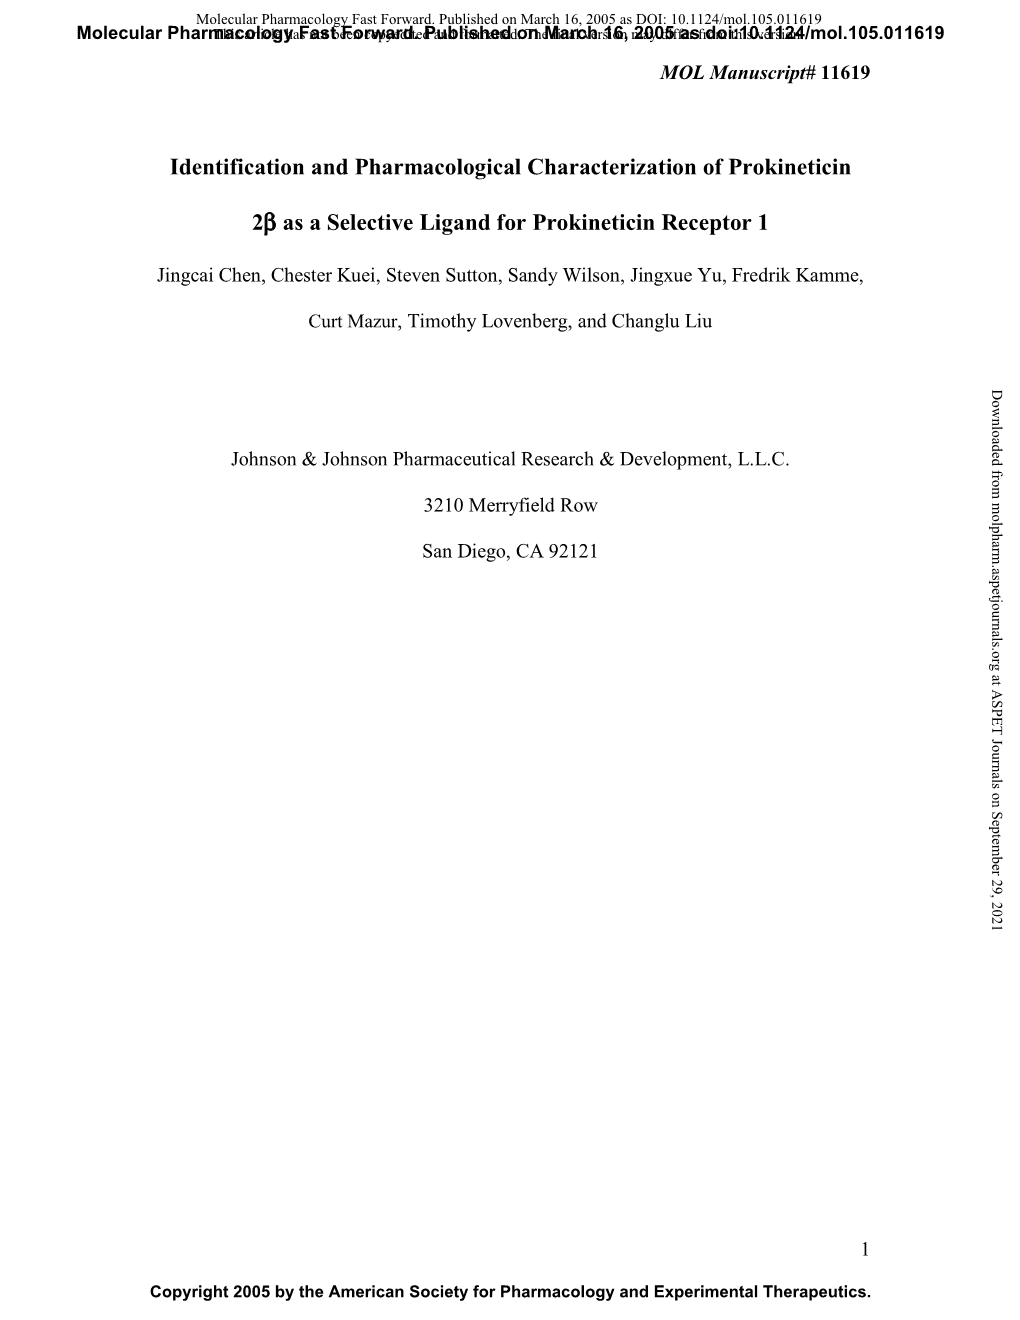 Identification and Pharmacological Characterization of Prokineticin